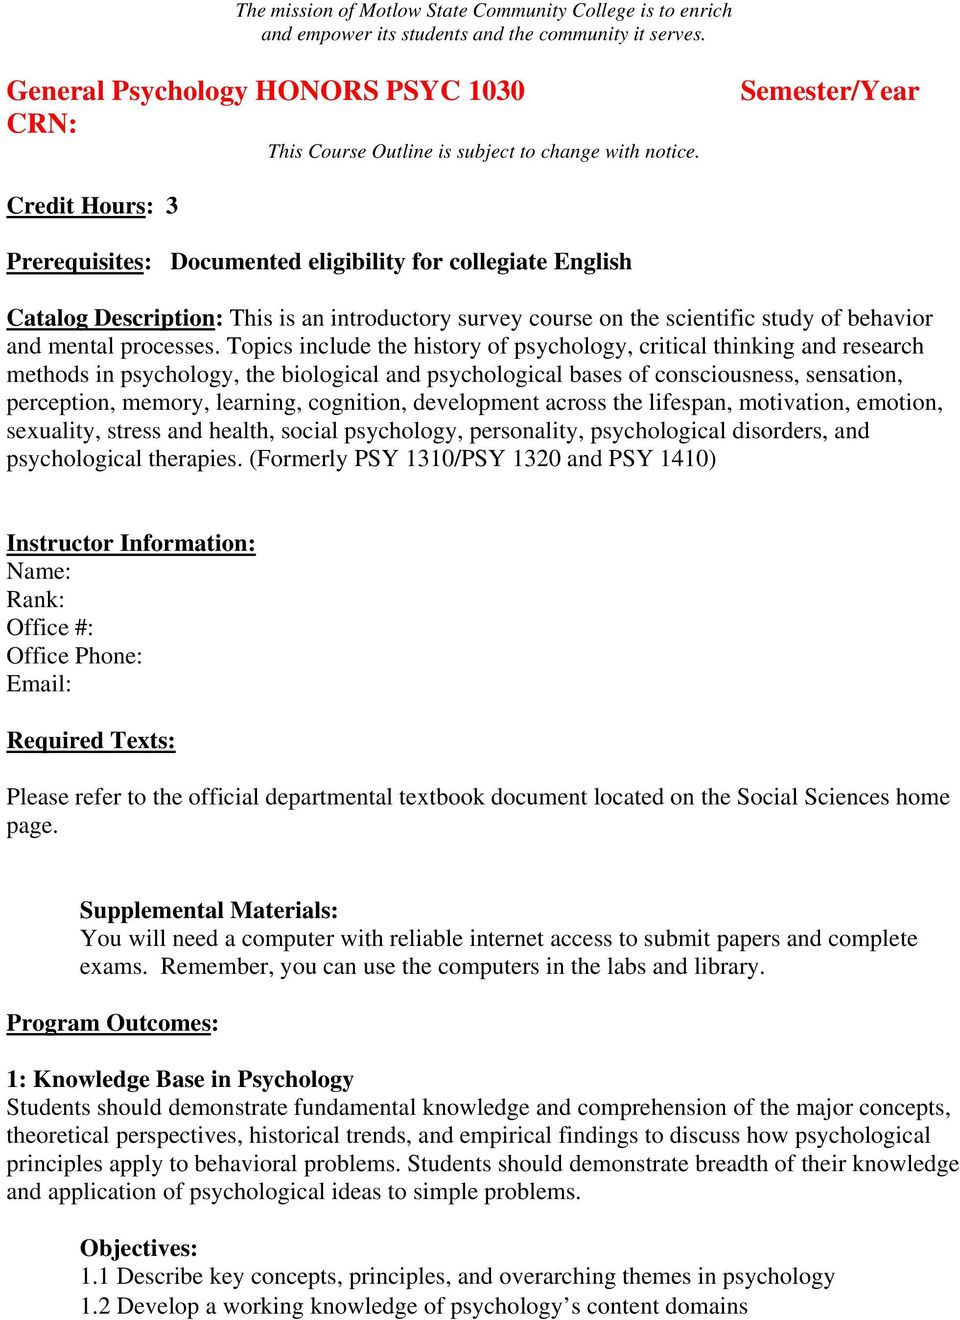 Semester/Year Credit Hours: 3 Prerequisites: Documented eligibility for collegiate English Catalog Description: This is an introductory survey course on the scientific study of behavior and mental